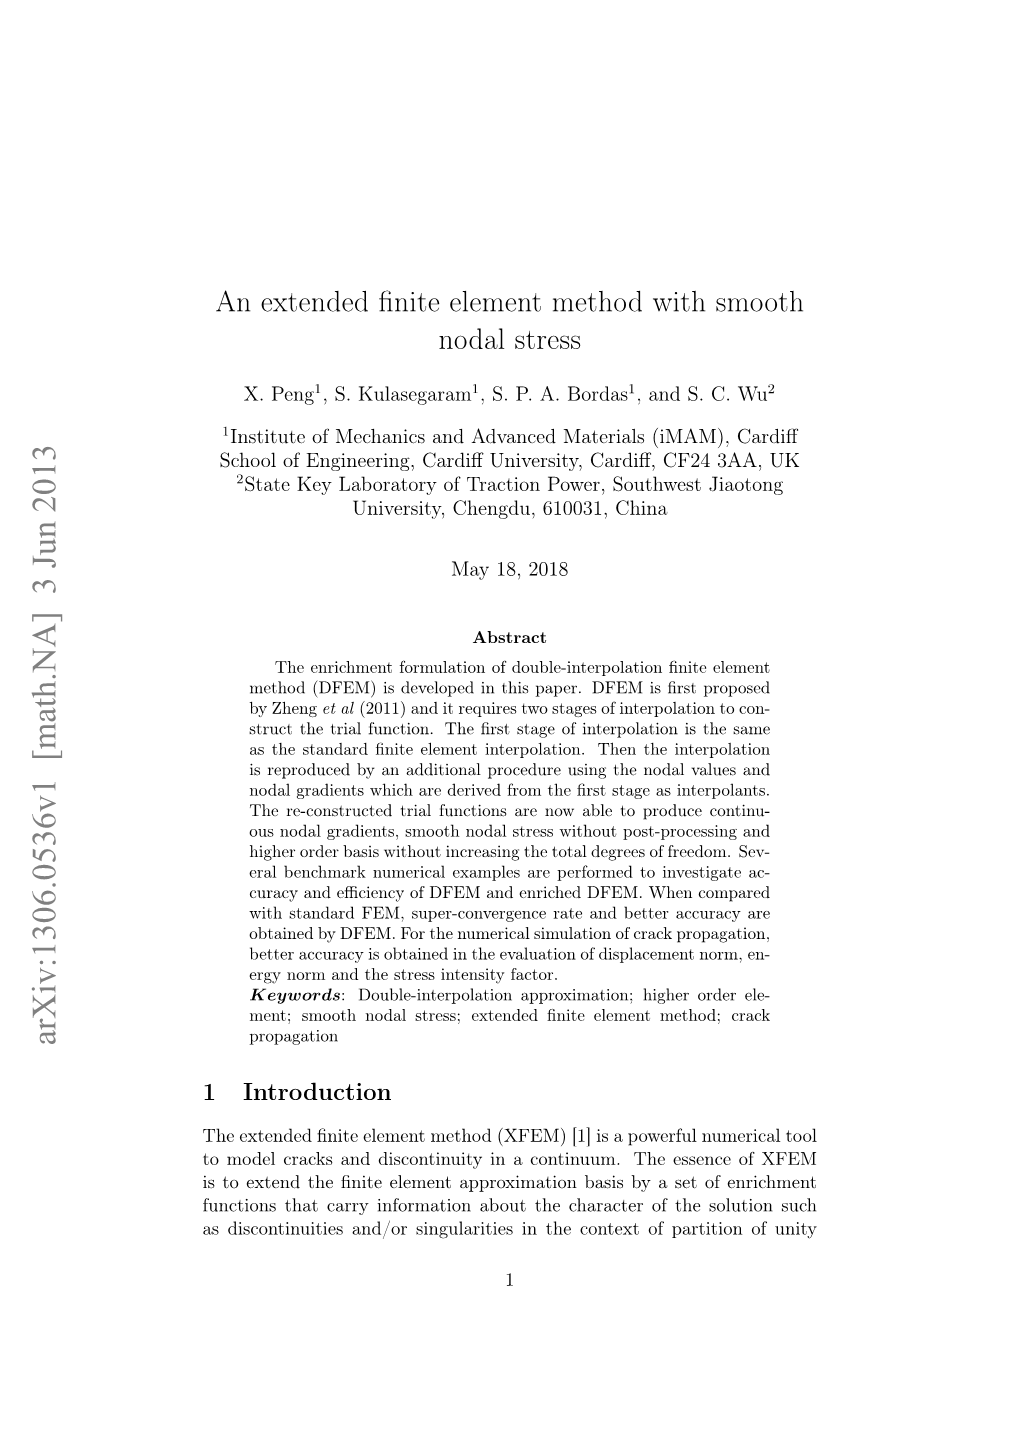 An Extended Finite Element Method with Smooth Nodal Stress